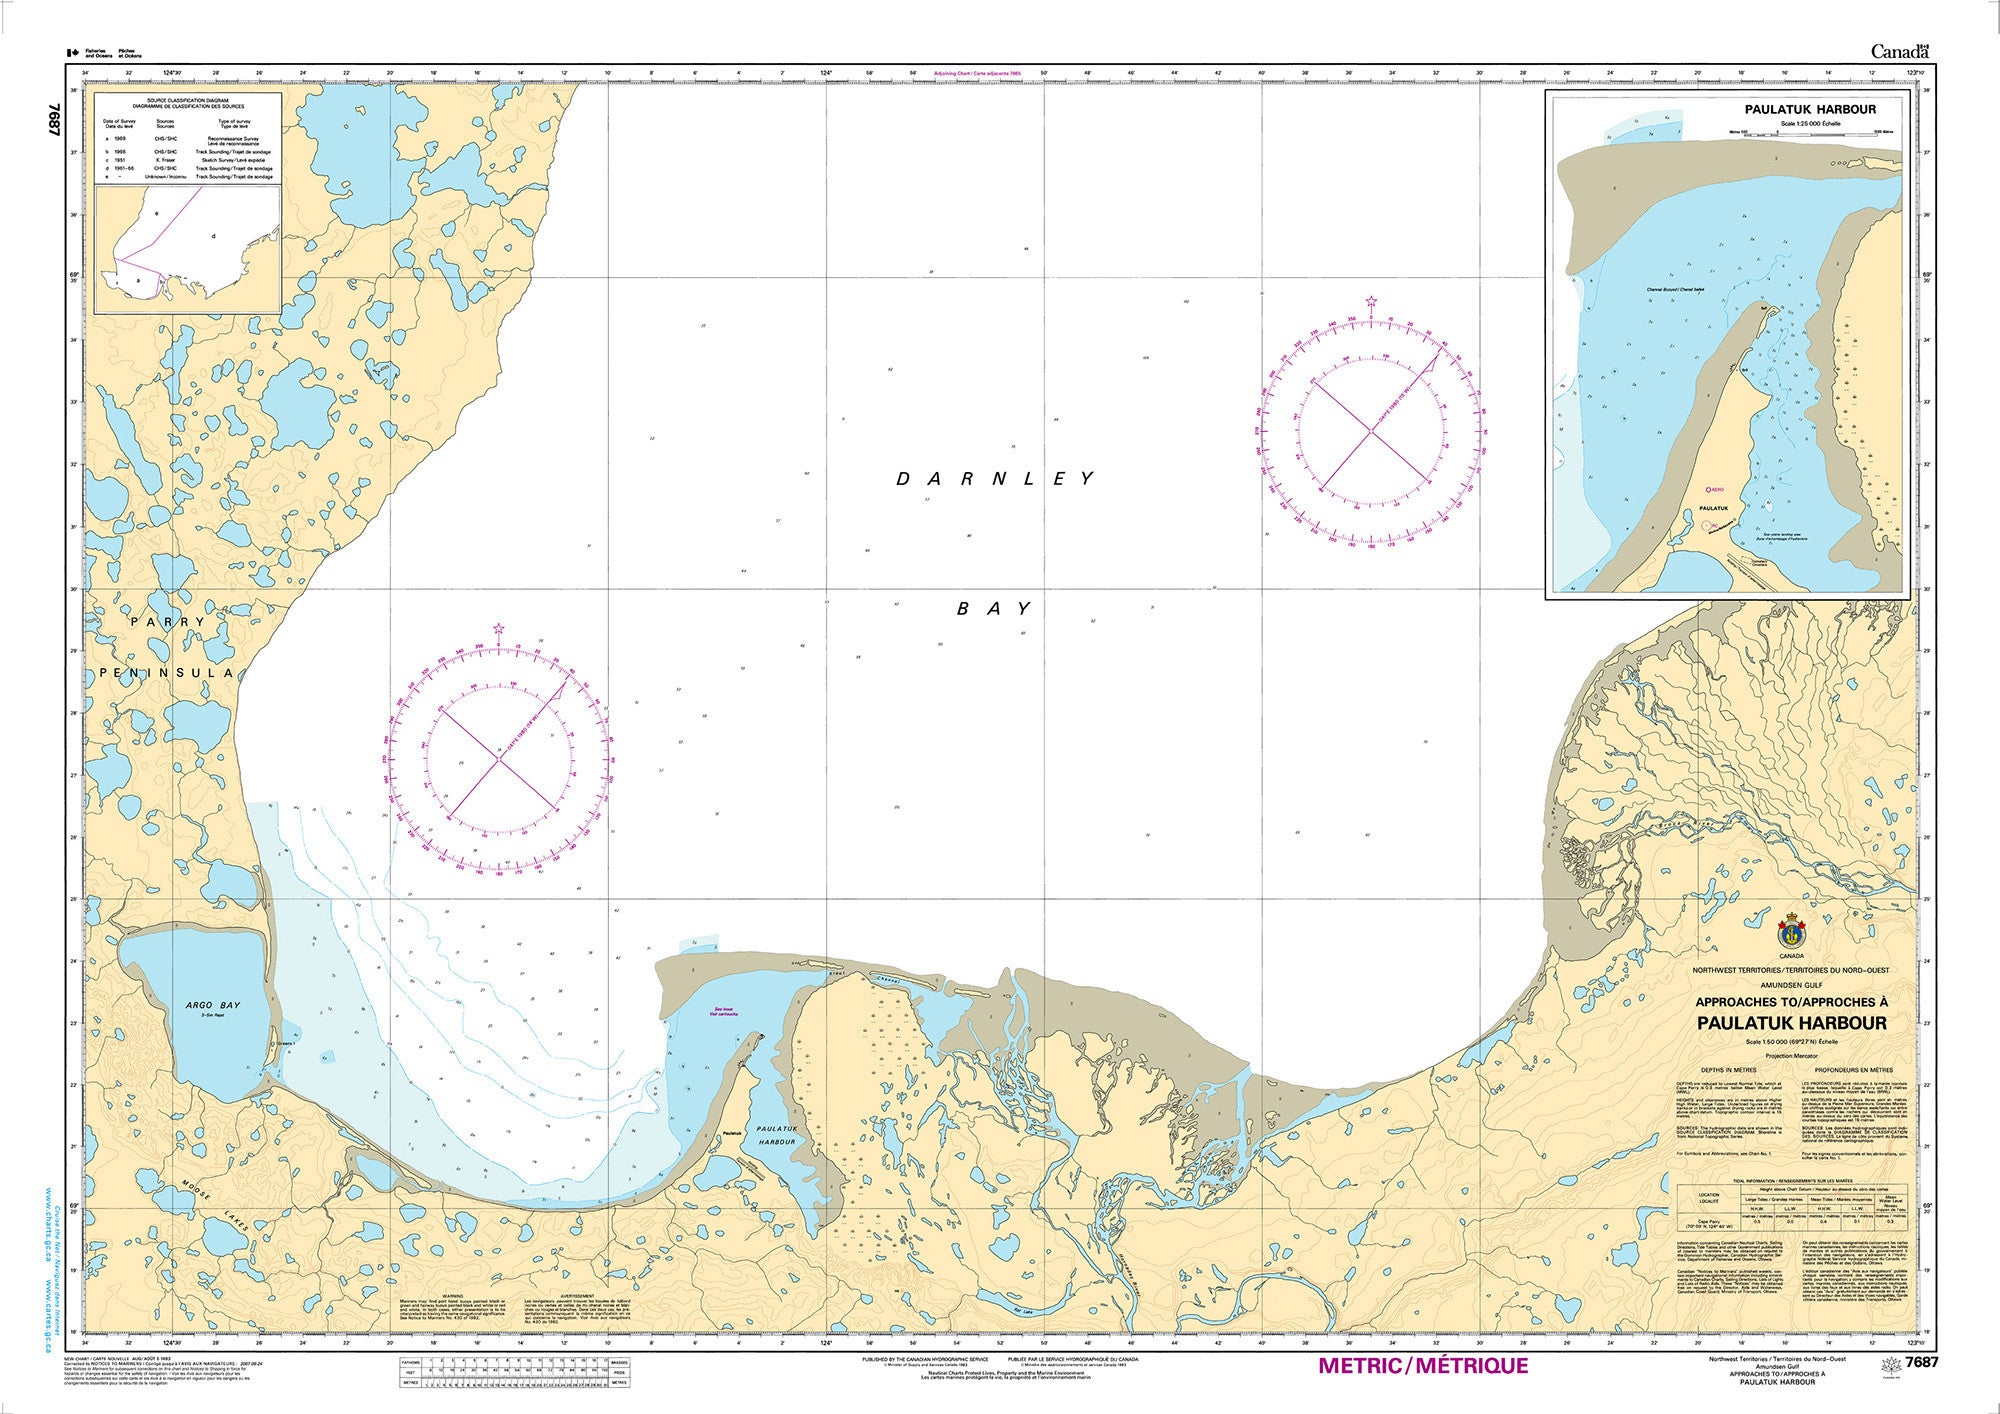 Canadian Hydrographic Service Nautical Chart CHS7687: Approaches to/Approches à Paulatuk Harbour